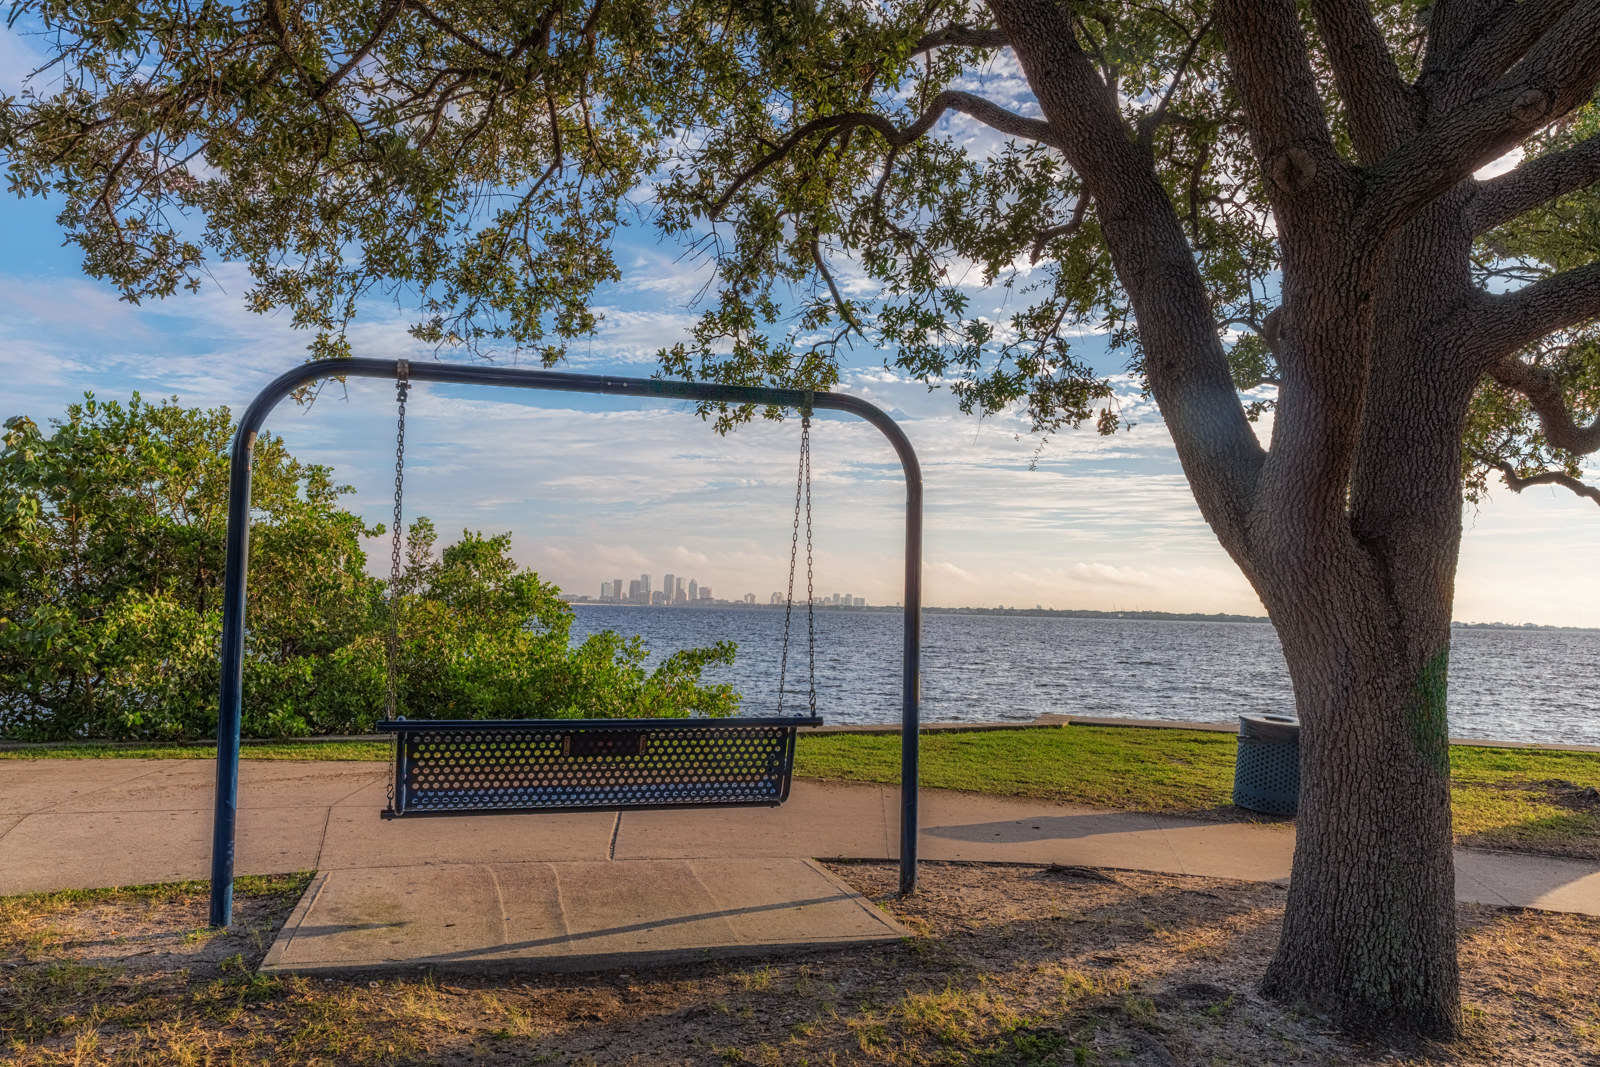 Swing with a View of Tampa, Tampa, Florida